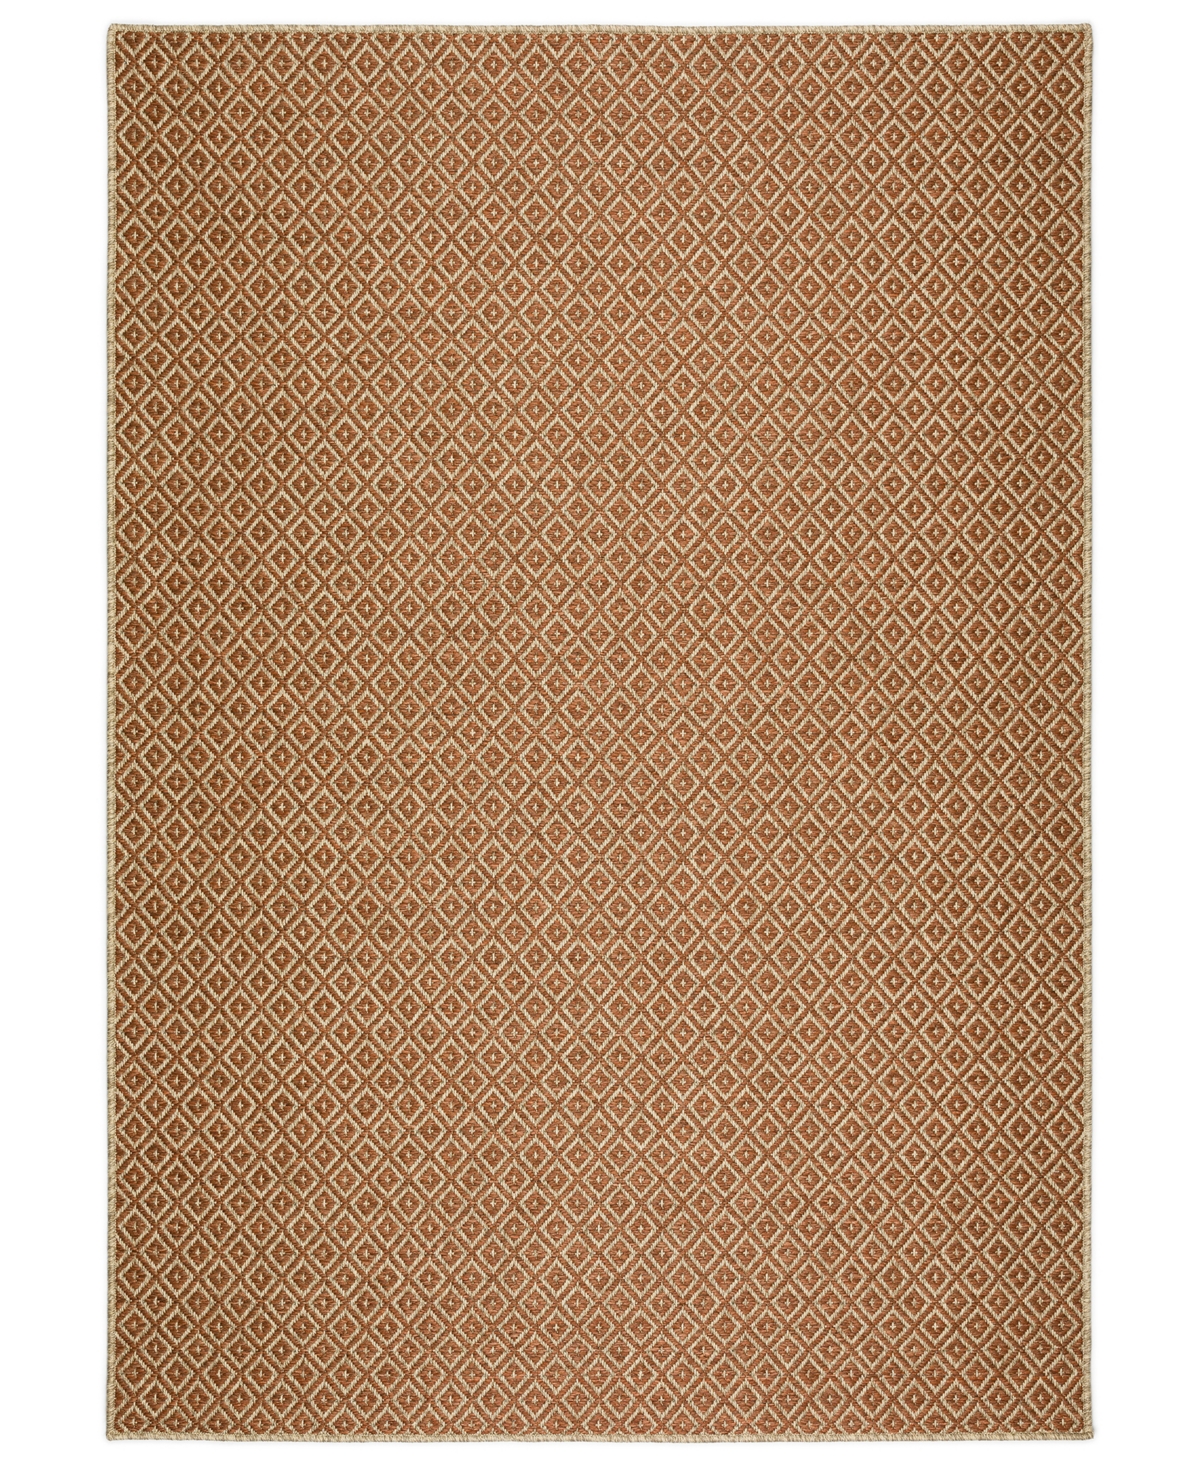 D Style Nusa Outdoor Nsa8 12' X 15' Area Rug In Paprika